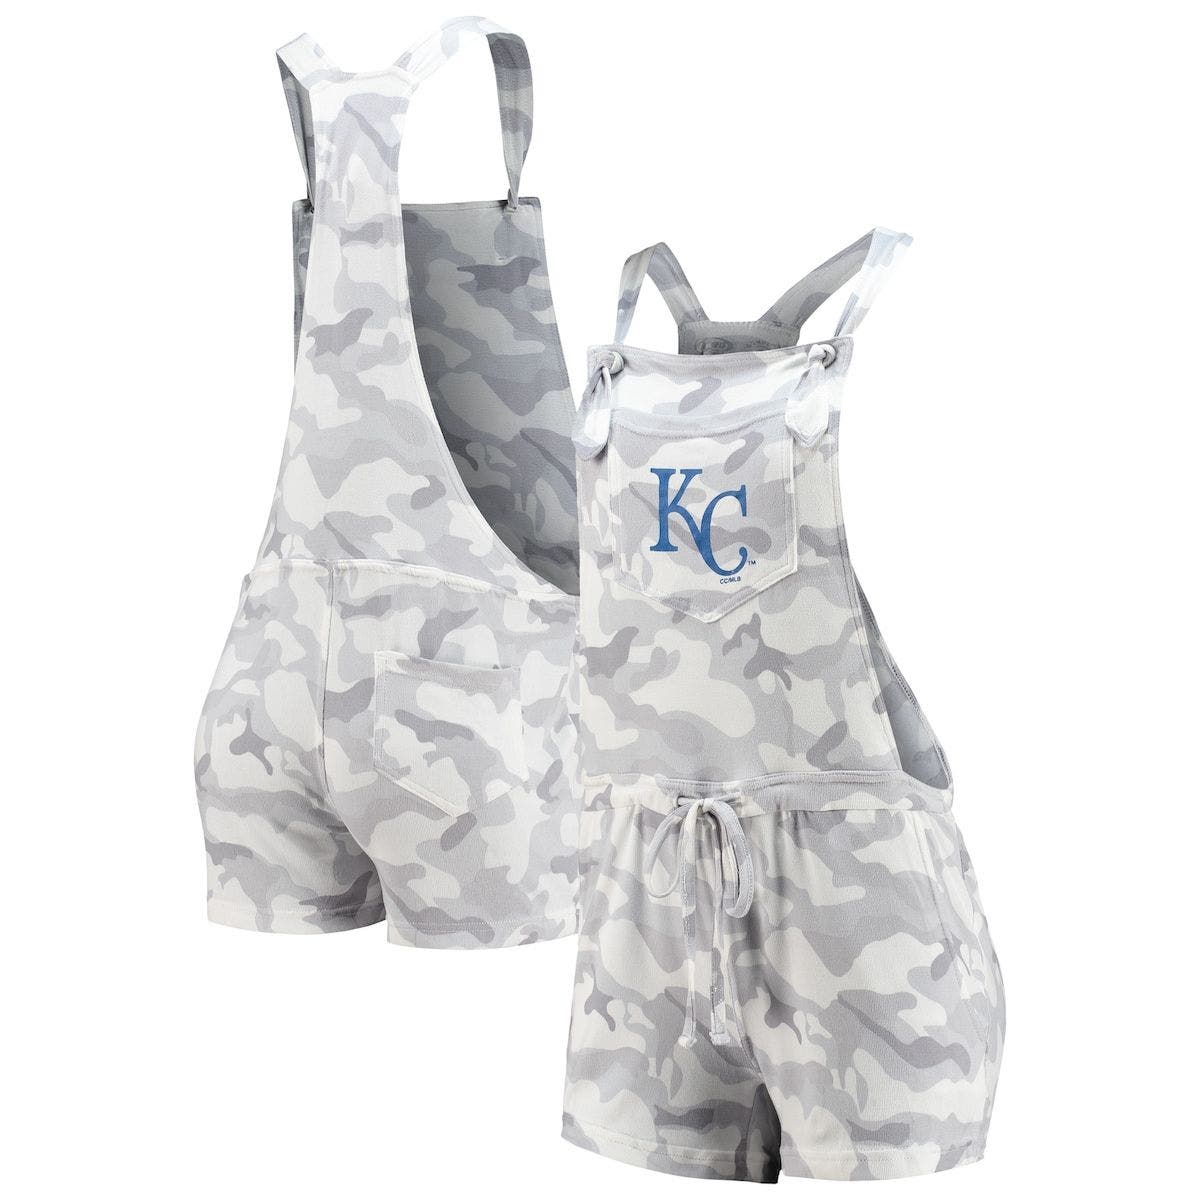 Nordstrom Women Clothing Dungarees Womens Gray Kansas City Royals Camo Overall Romper at Nordstrom 